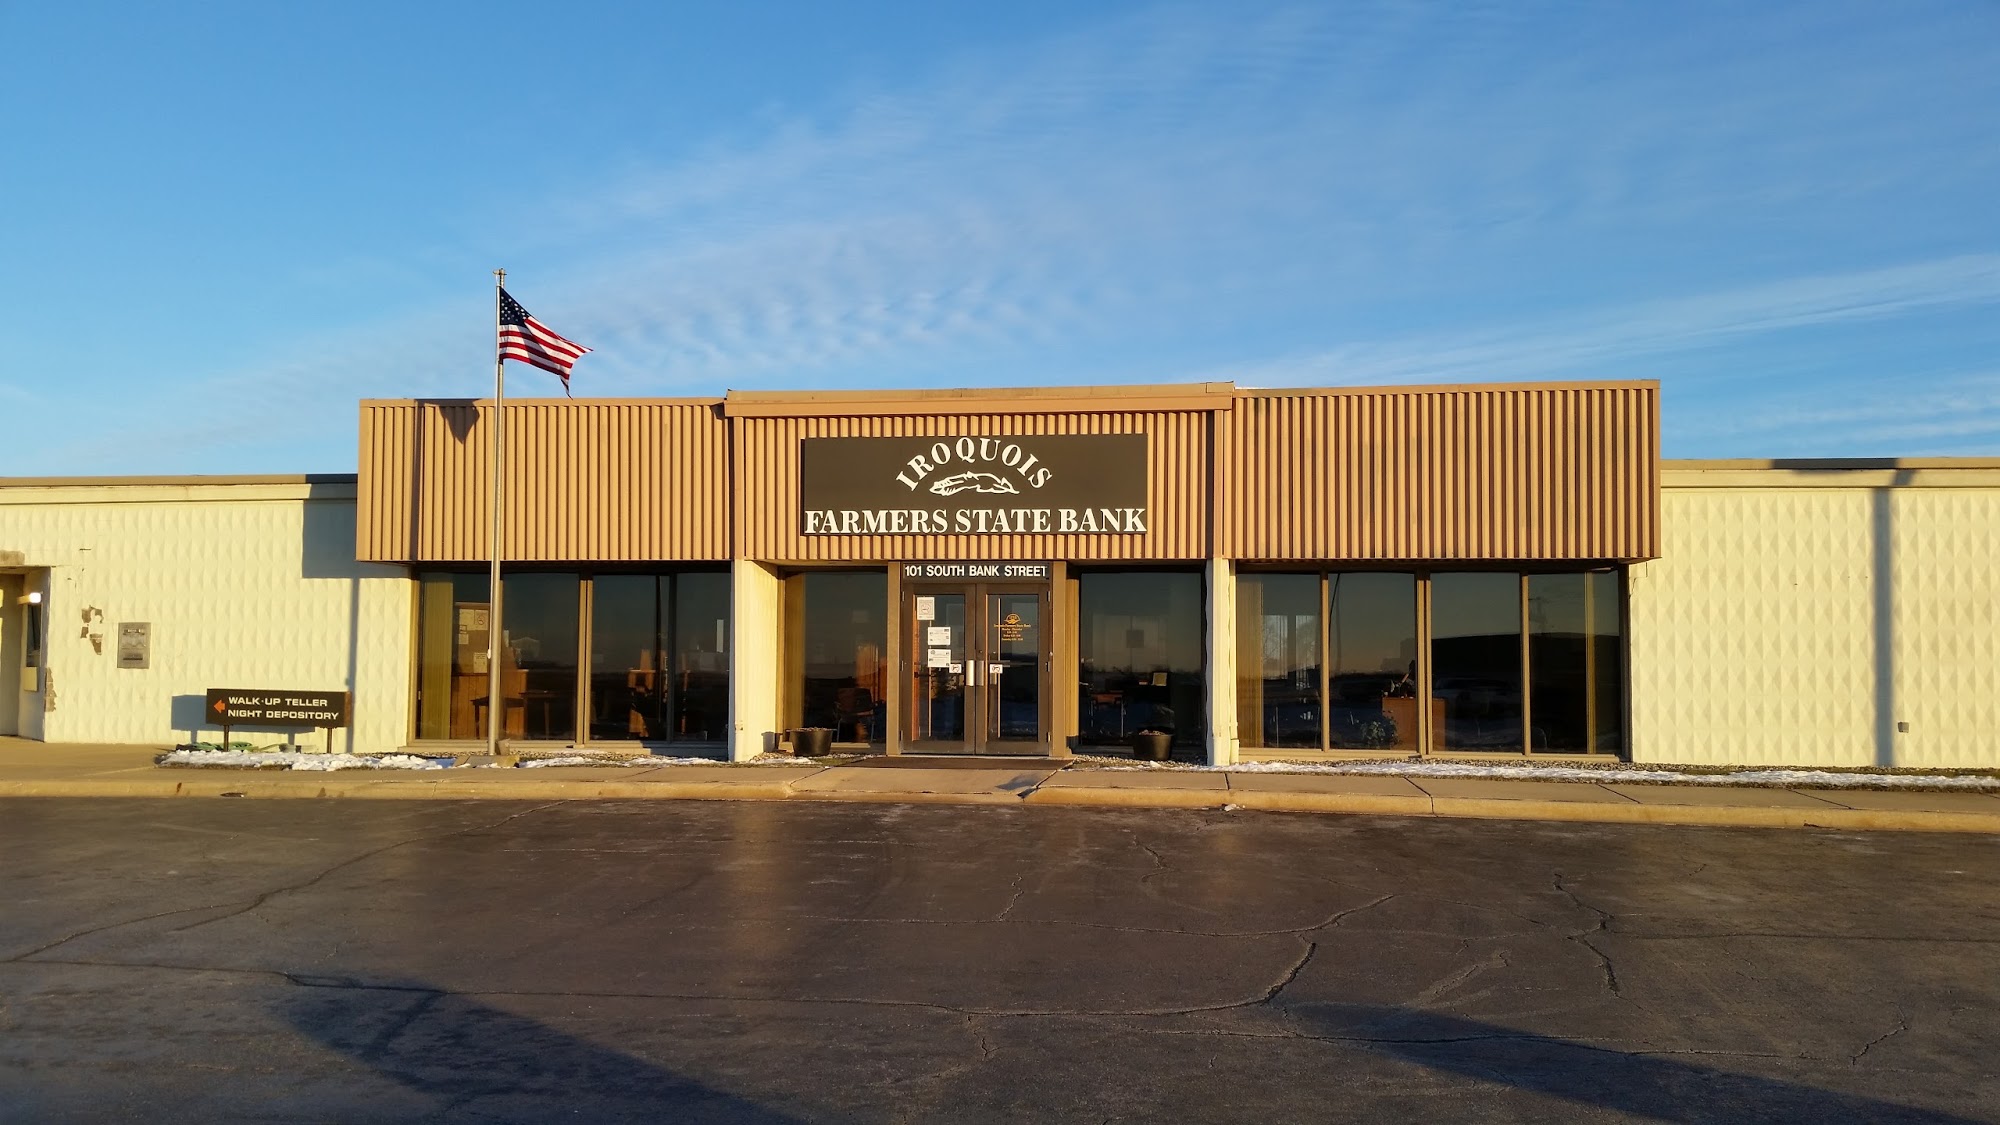 Iroquois Farmers State Bank